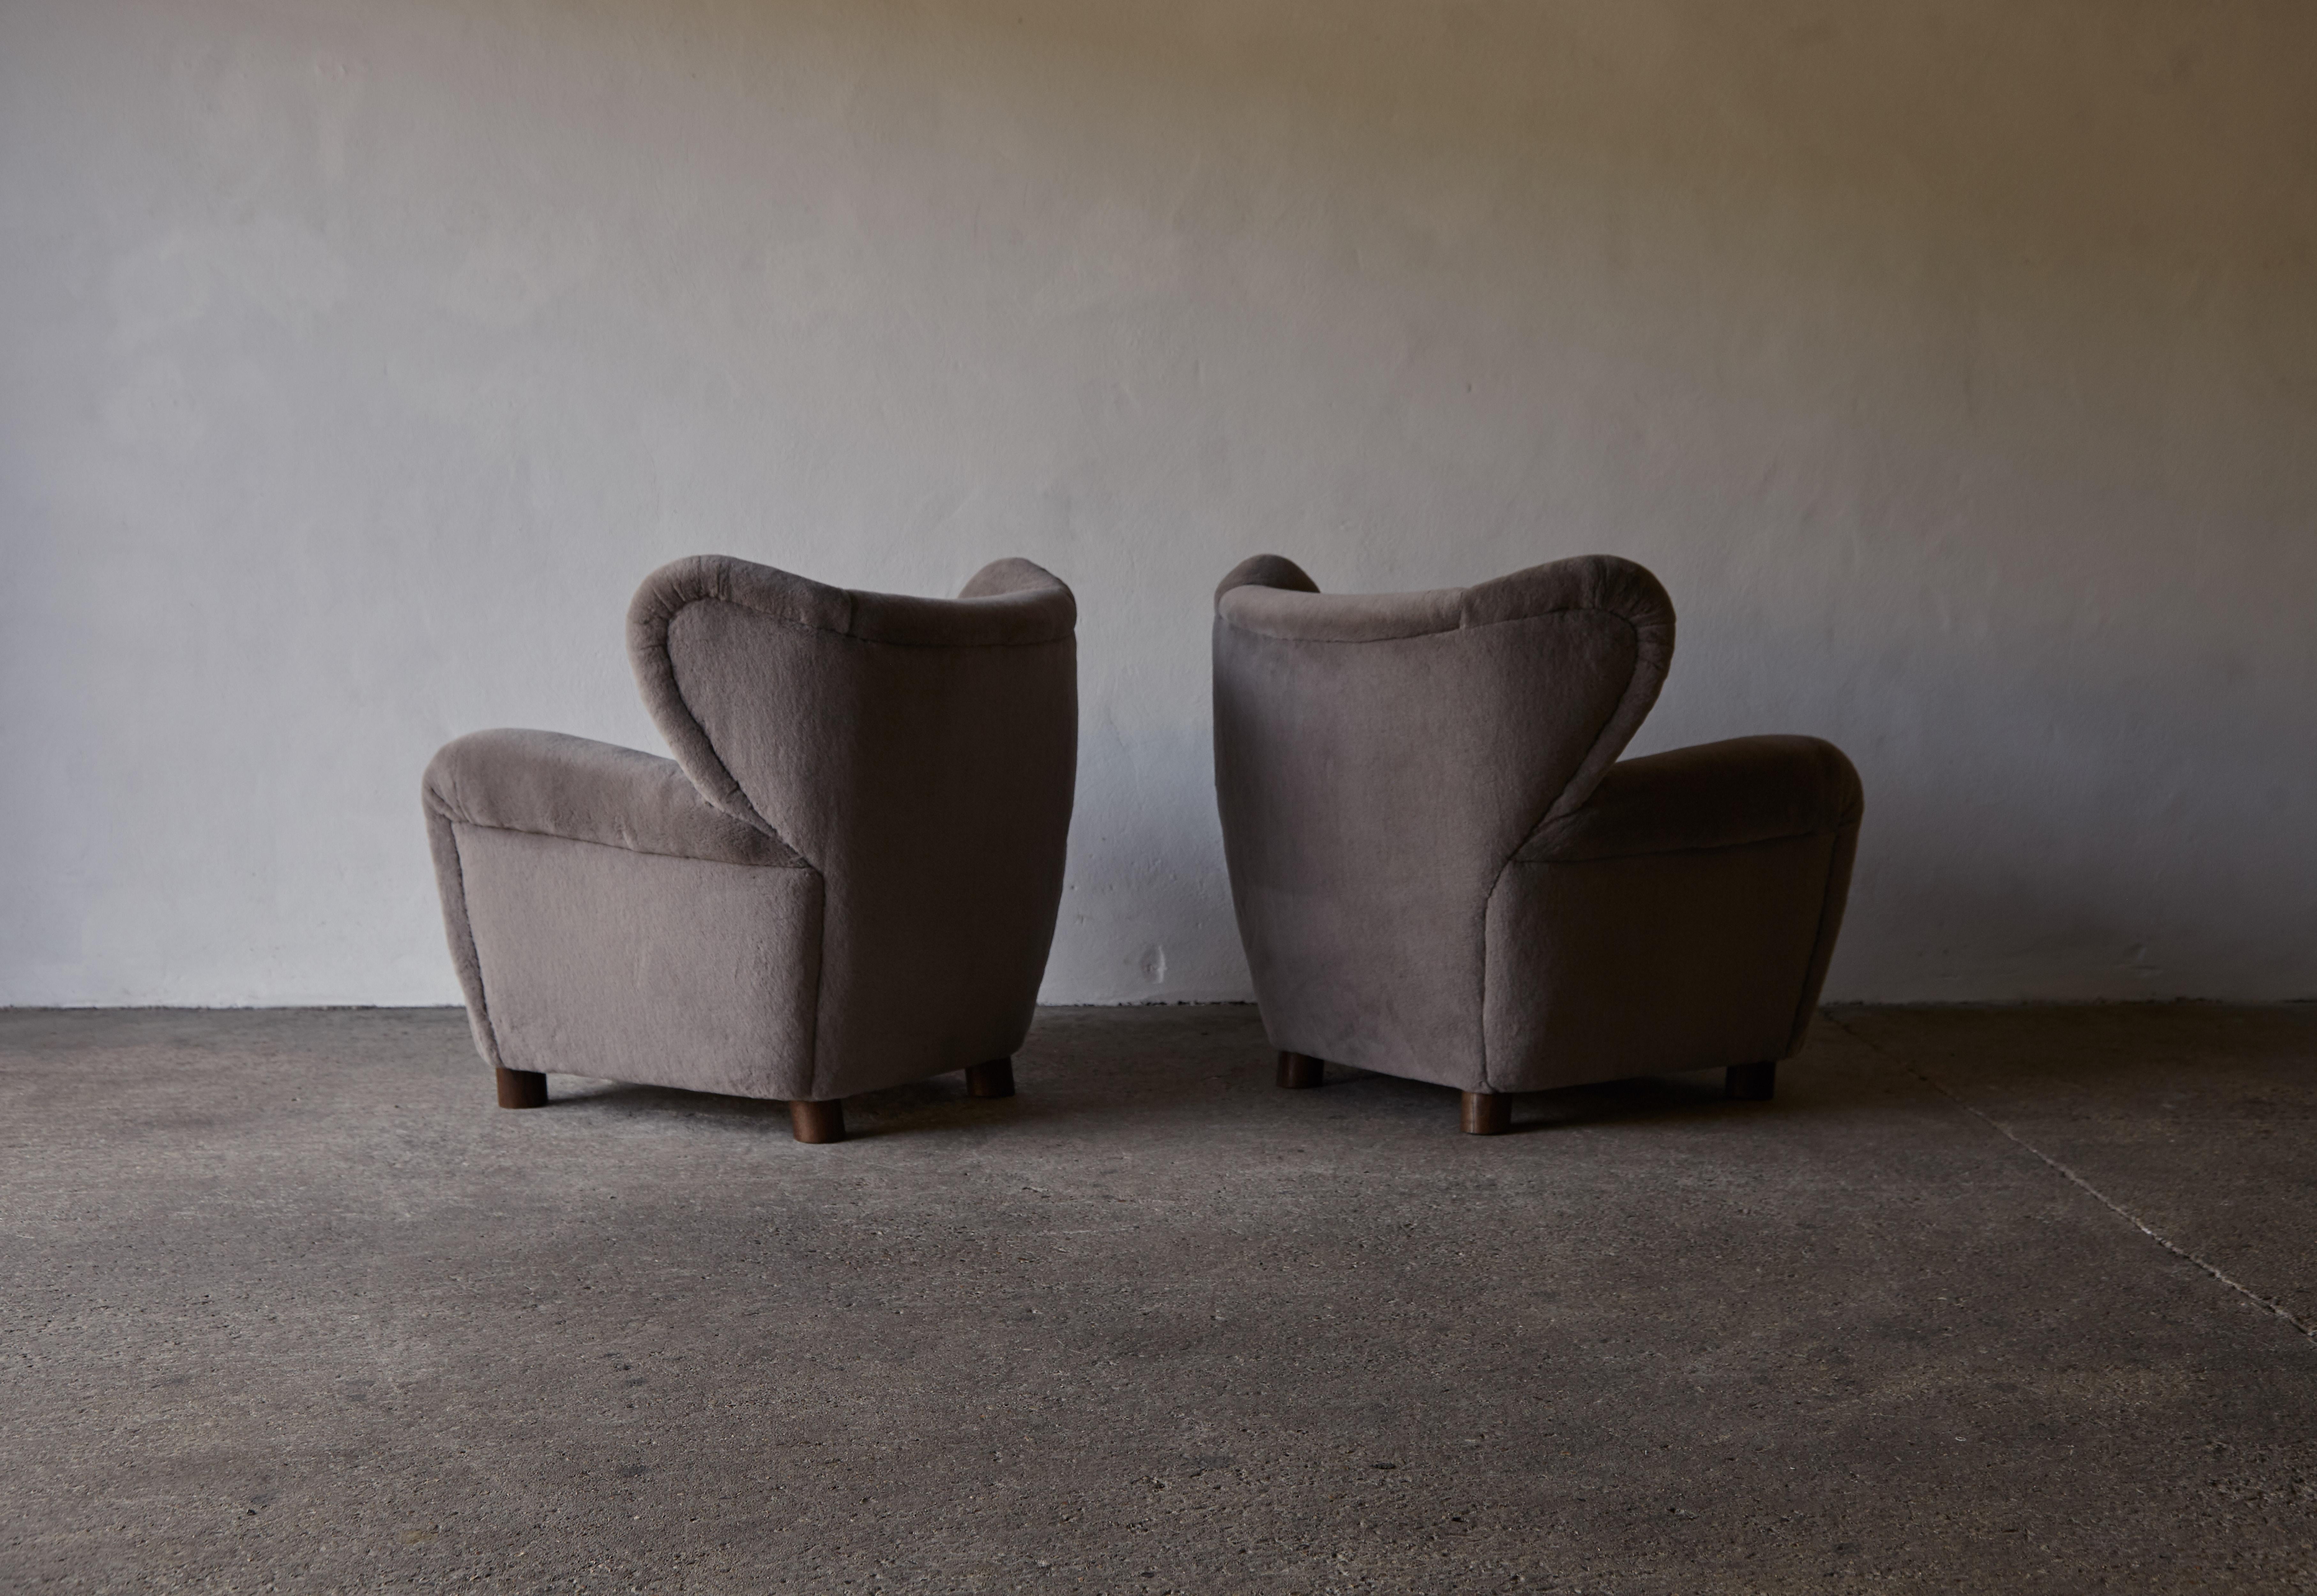 Superb Pair of Armchairs, Newly Upholstered in Pure Alpaca, Denmark, 1940s / 50s 7